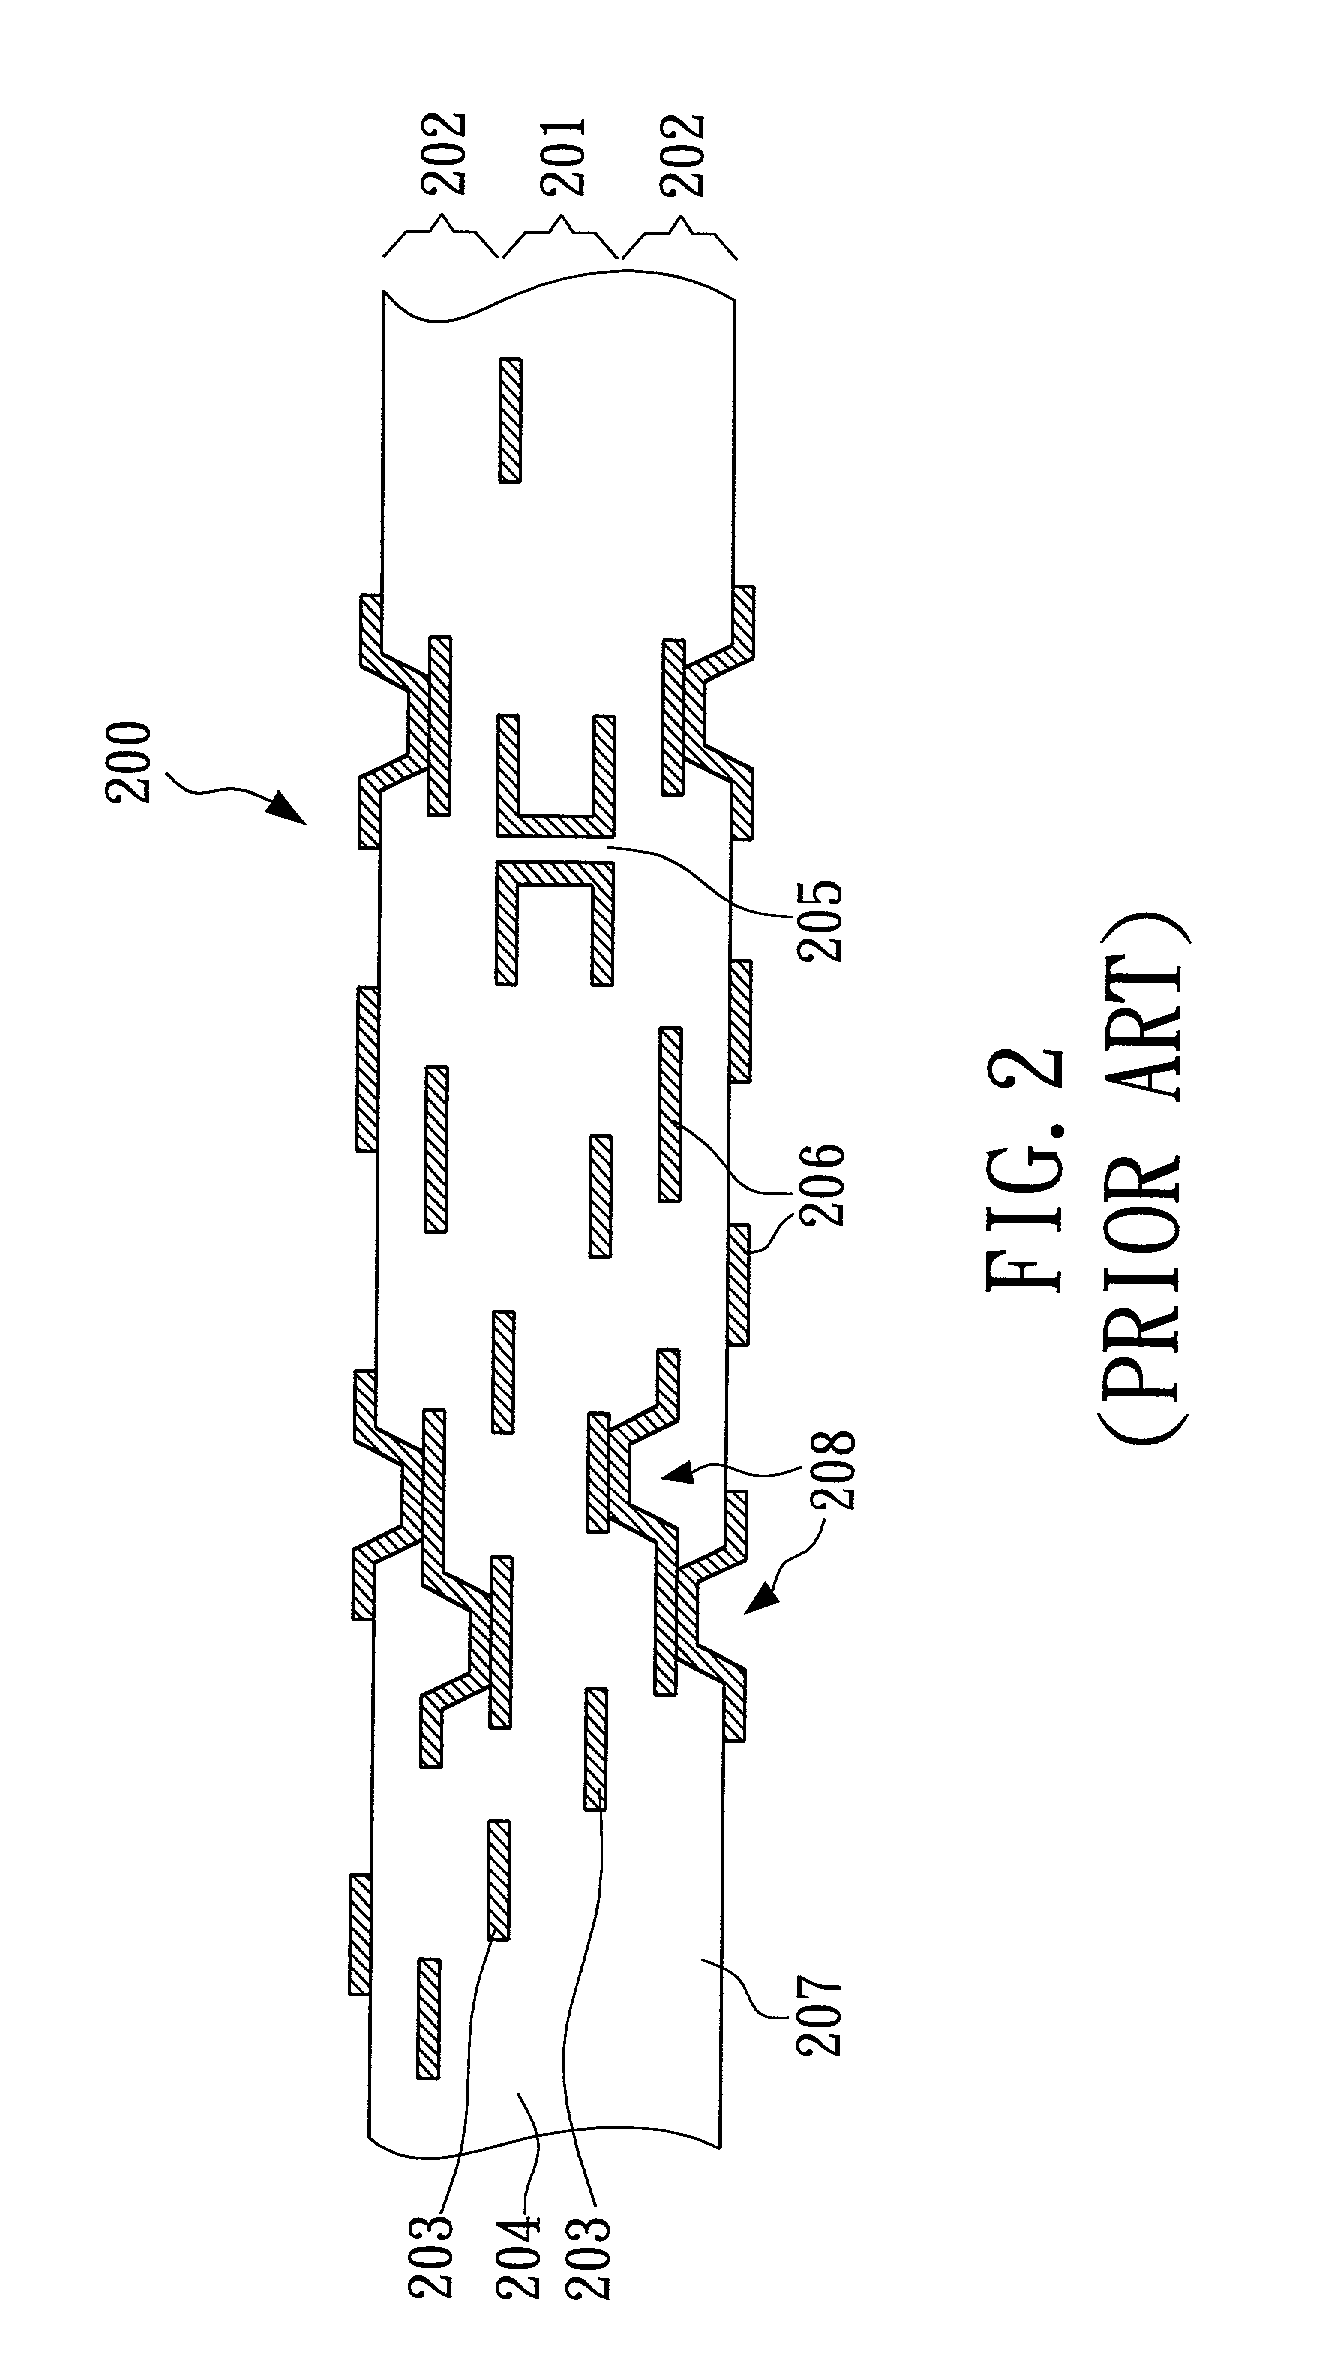 Thin core substrate for fabricating a build-up circuit board